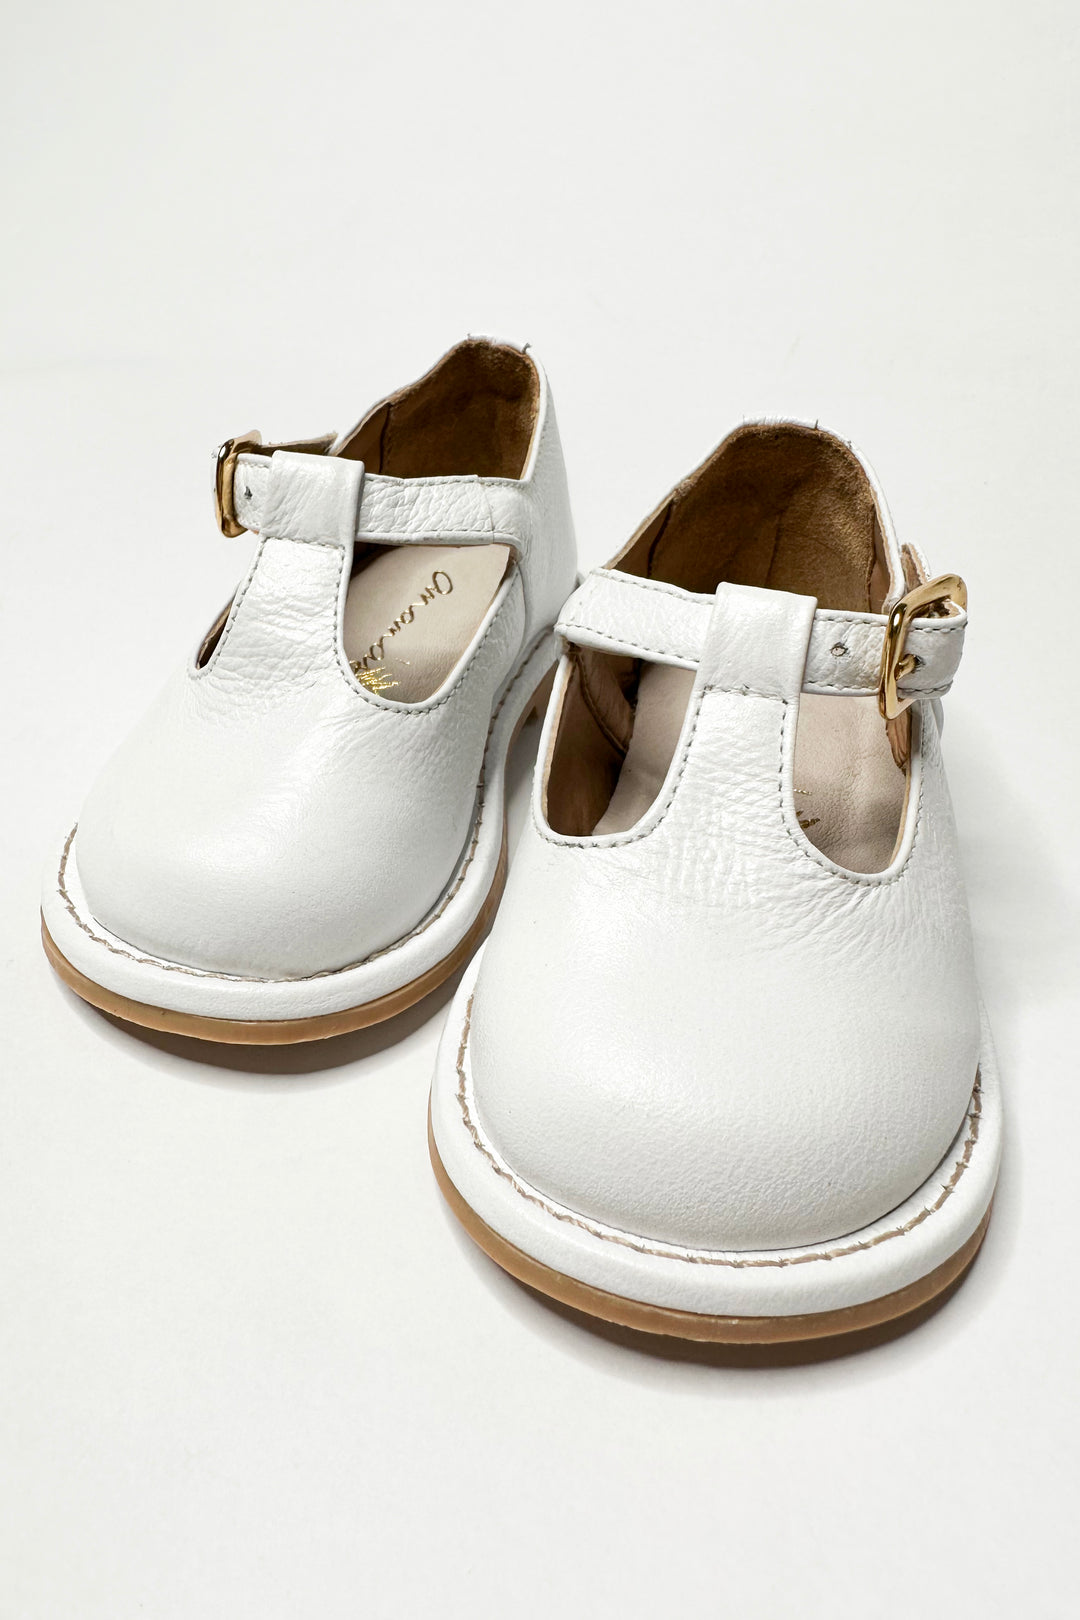 Ananás Petit "George" White Leather Shoes | Millie and John